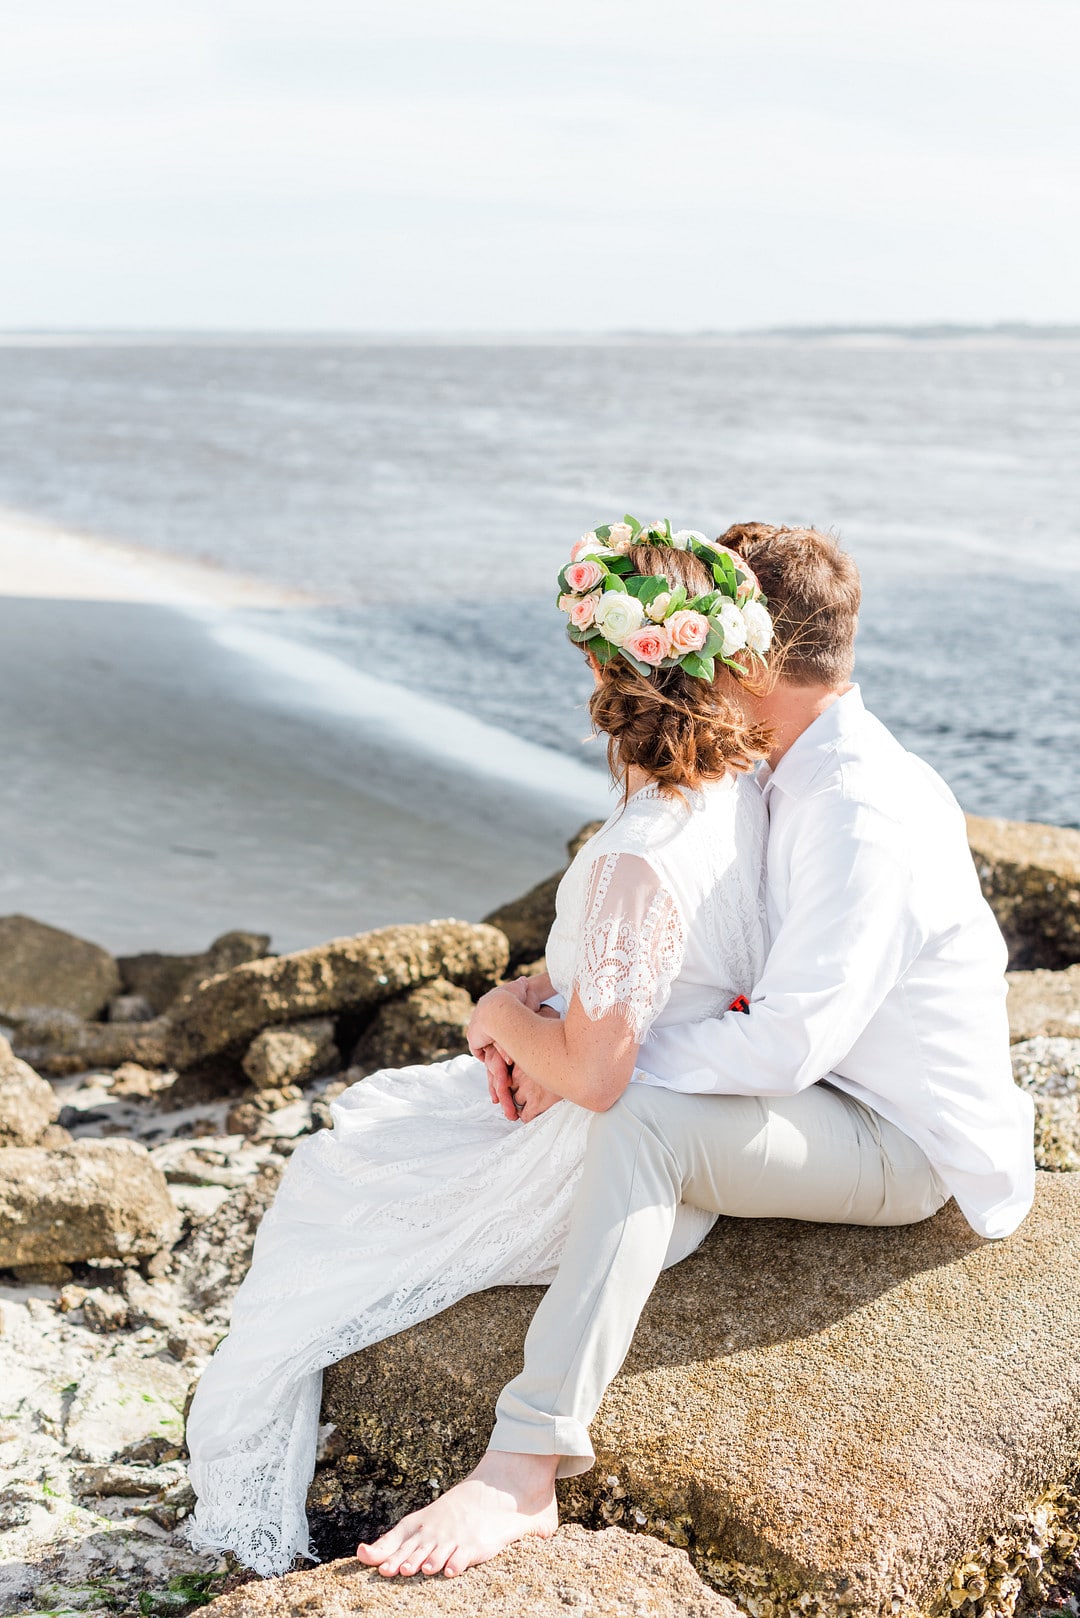 Romantic, Spring Styled Wedding with Horses on the Beach_Christine Austin Photography_©christineaustinphotography_2021_RomanticBeachStyledShoot_Austin+Naomi_21_low